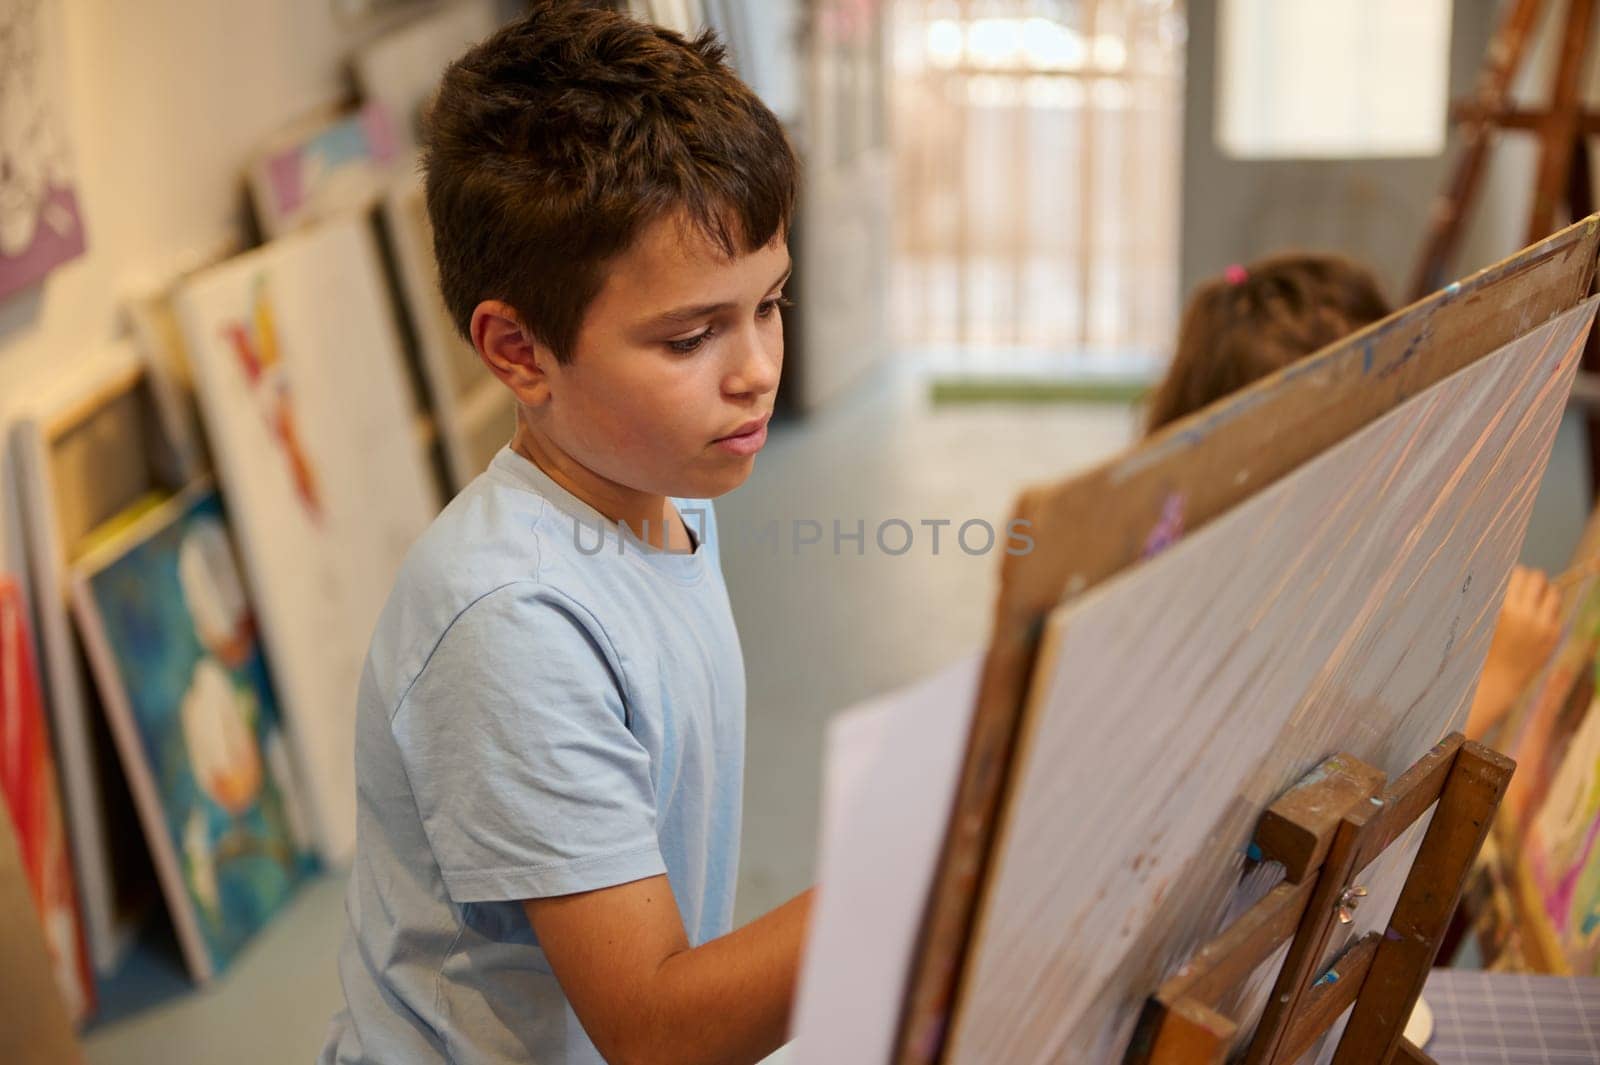 Closeup portrait of an inspired talented boy artist painter painting on a canvas with paintbrush and colorful acrylic paints in a painting class